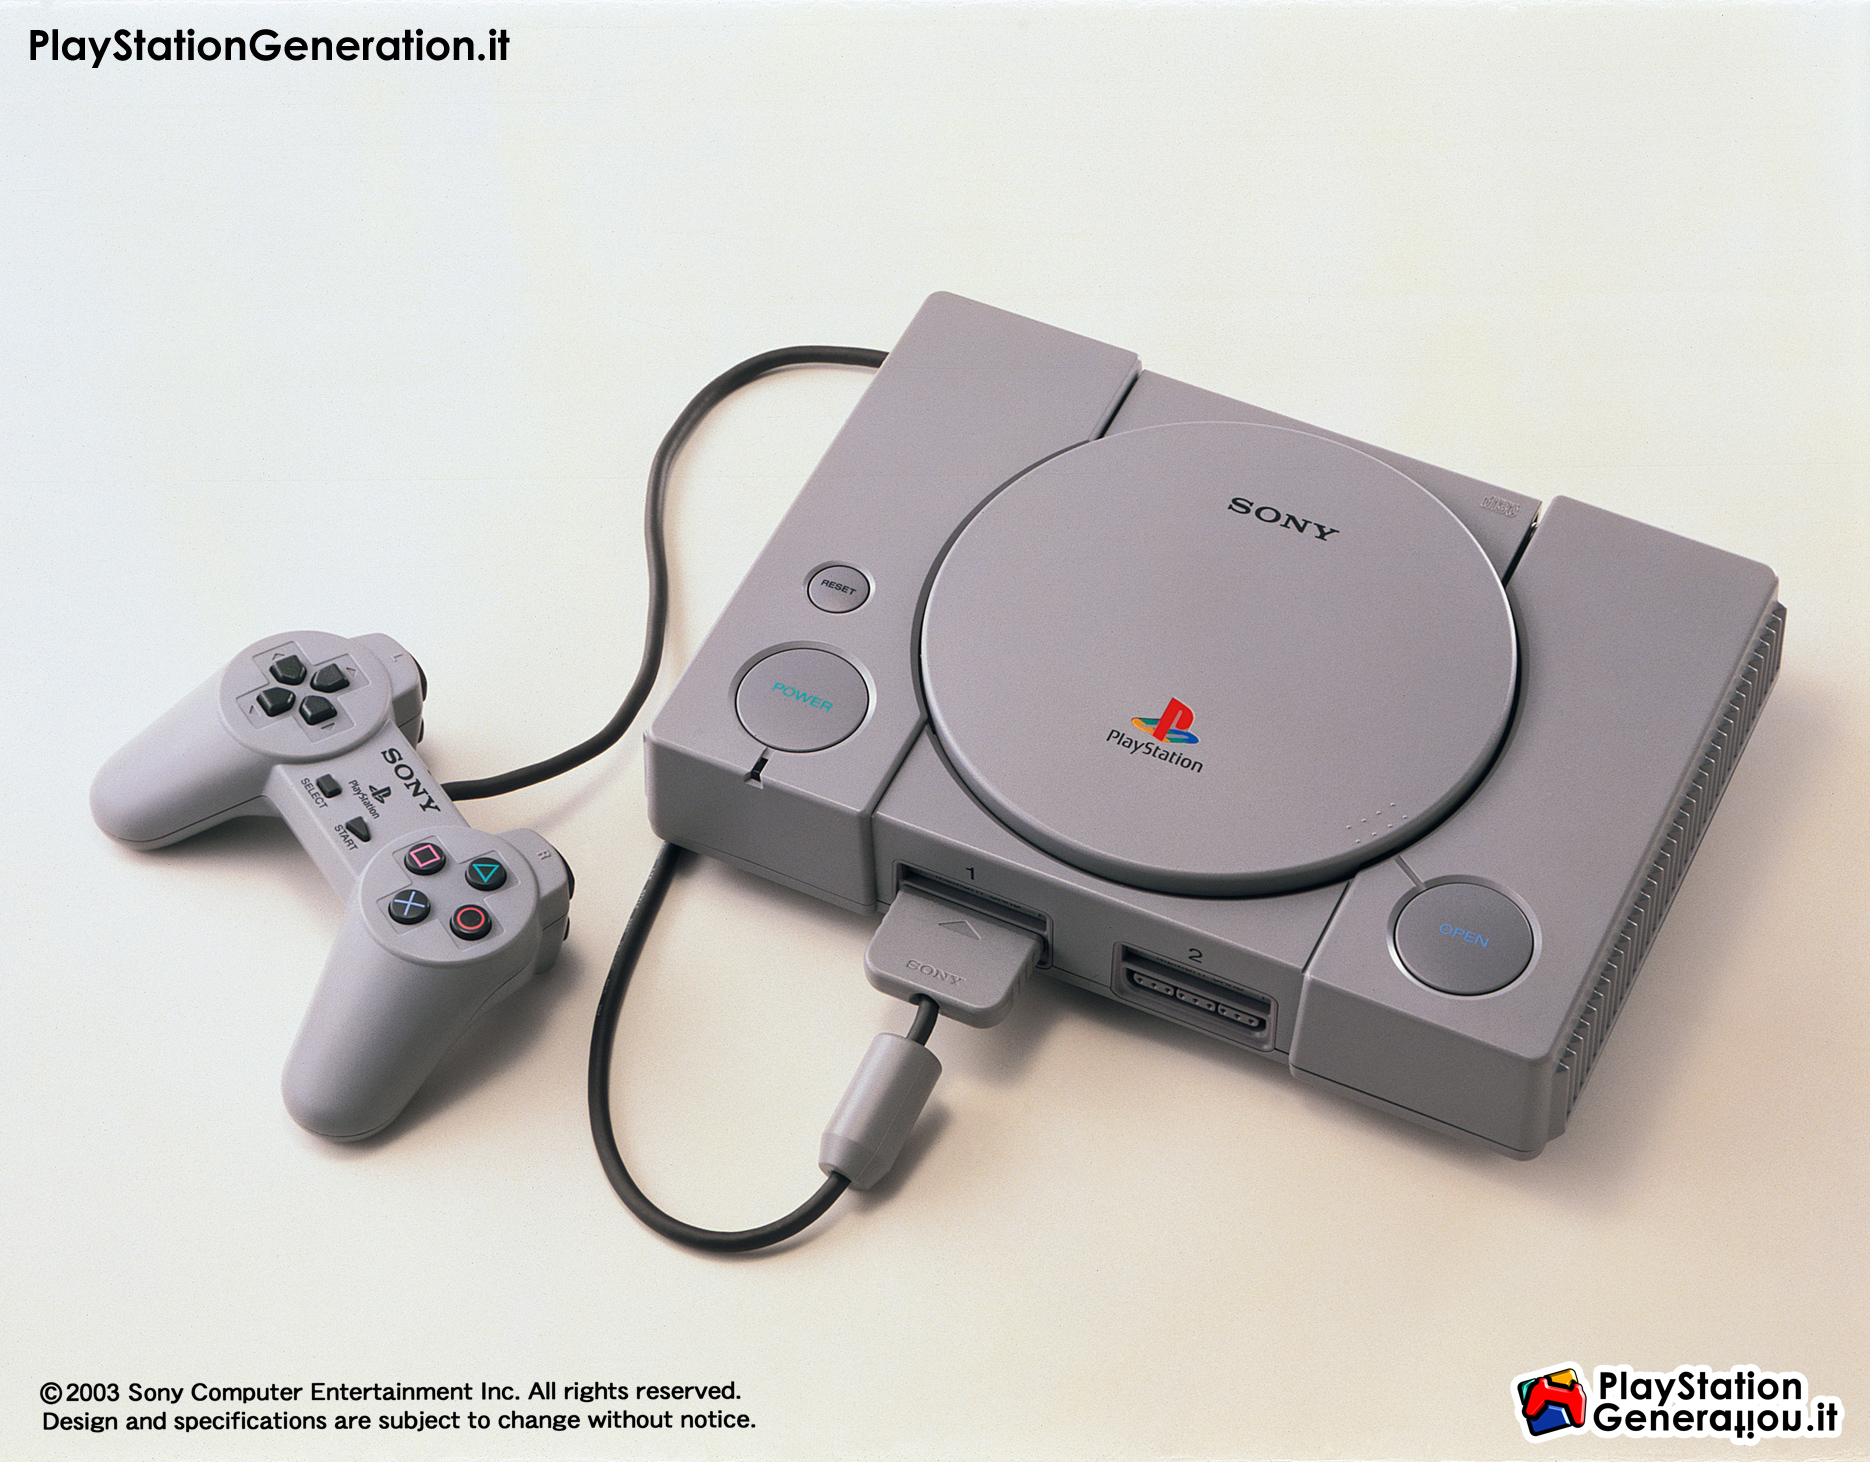 Nintendo ps1. Ps1 SCPH 1000. Sony PLAYSTATION SCPH-1000. Sony PLAYSTATION 1 1994. Sony PLAYSTATION 1990.